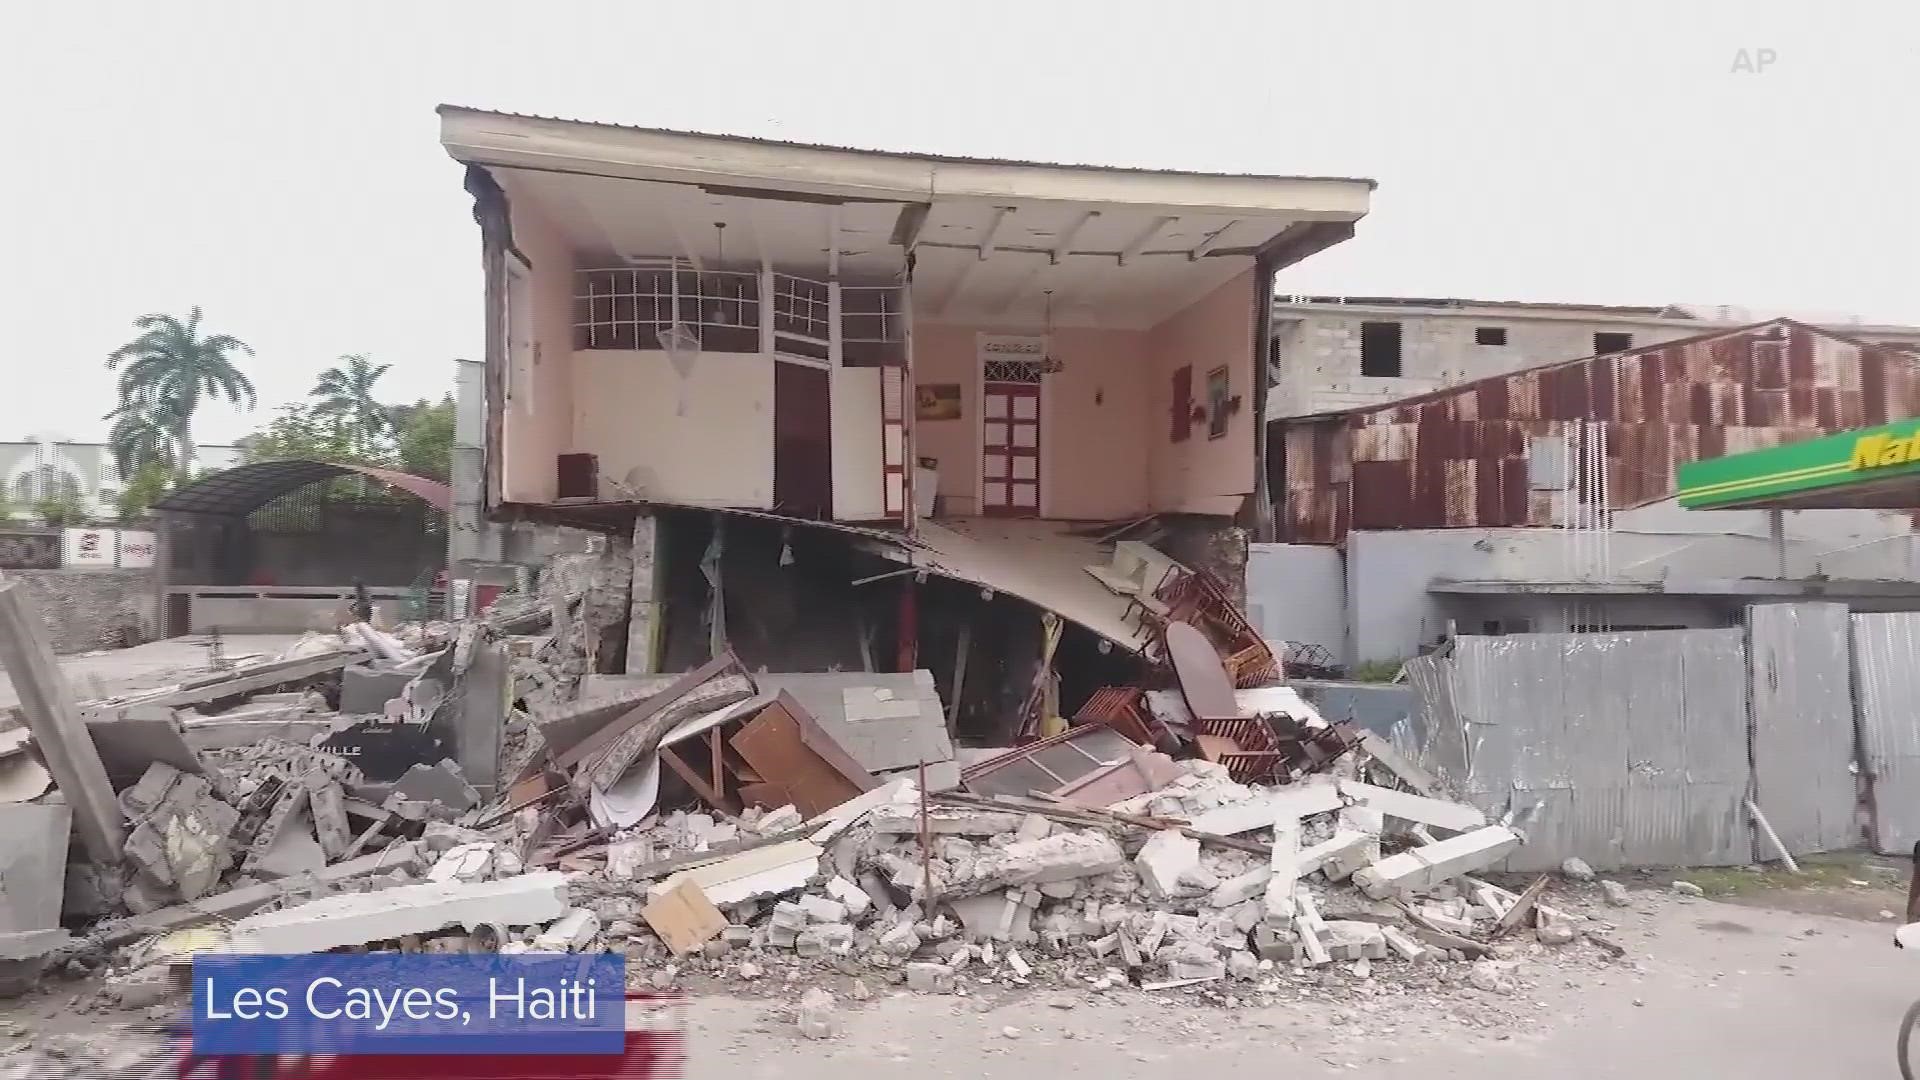 Drone video shows some of the damage in Les Cayes, Haiti after a 7.2 magnitude earthquake on Saturday (8/14)